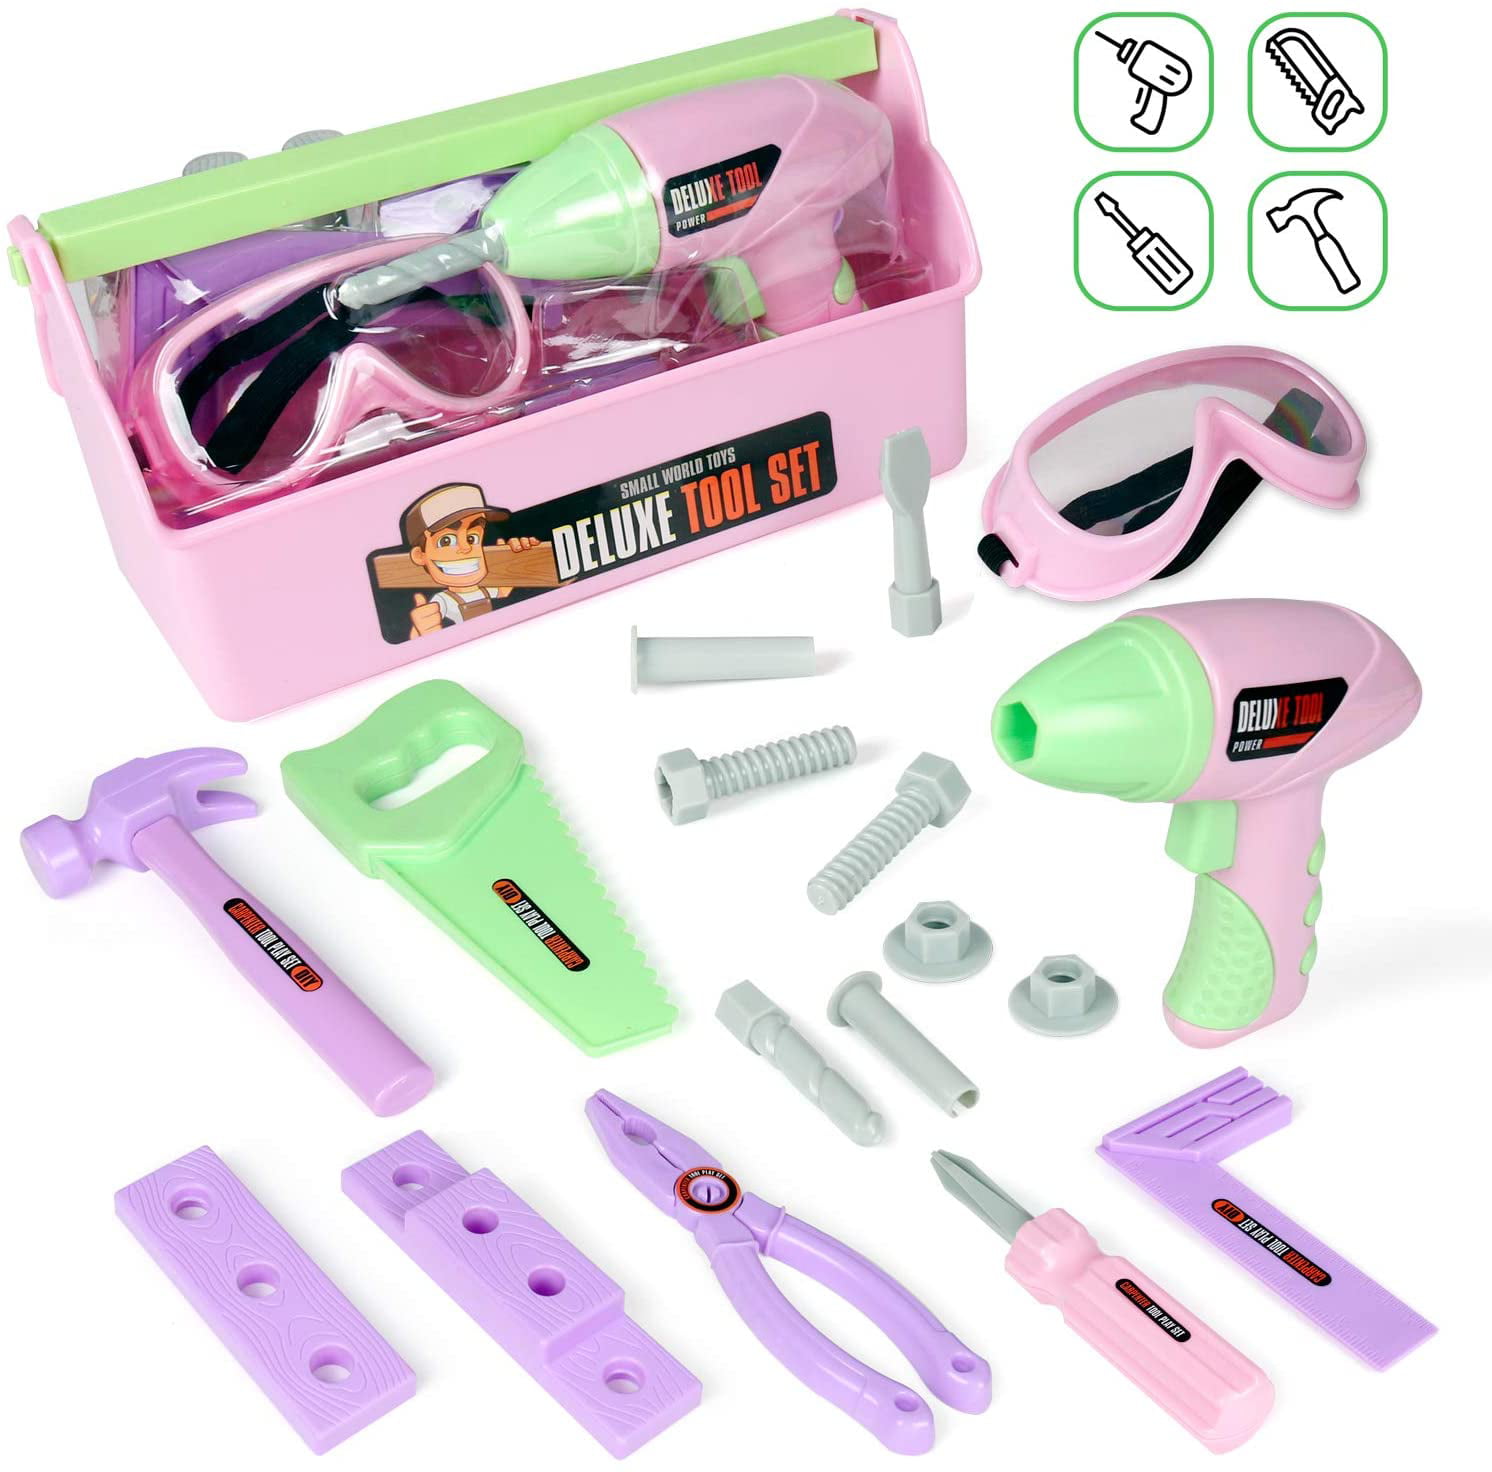 DIY Saw Box Tool Set Work Pretend Toy Role Play Kids Gift Builder Screwdriver 